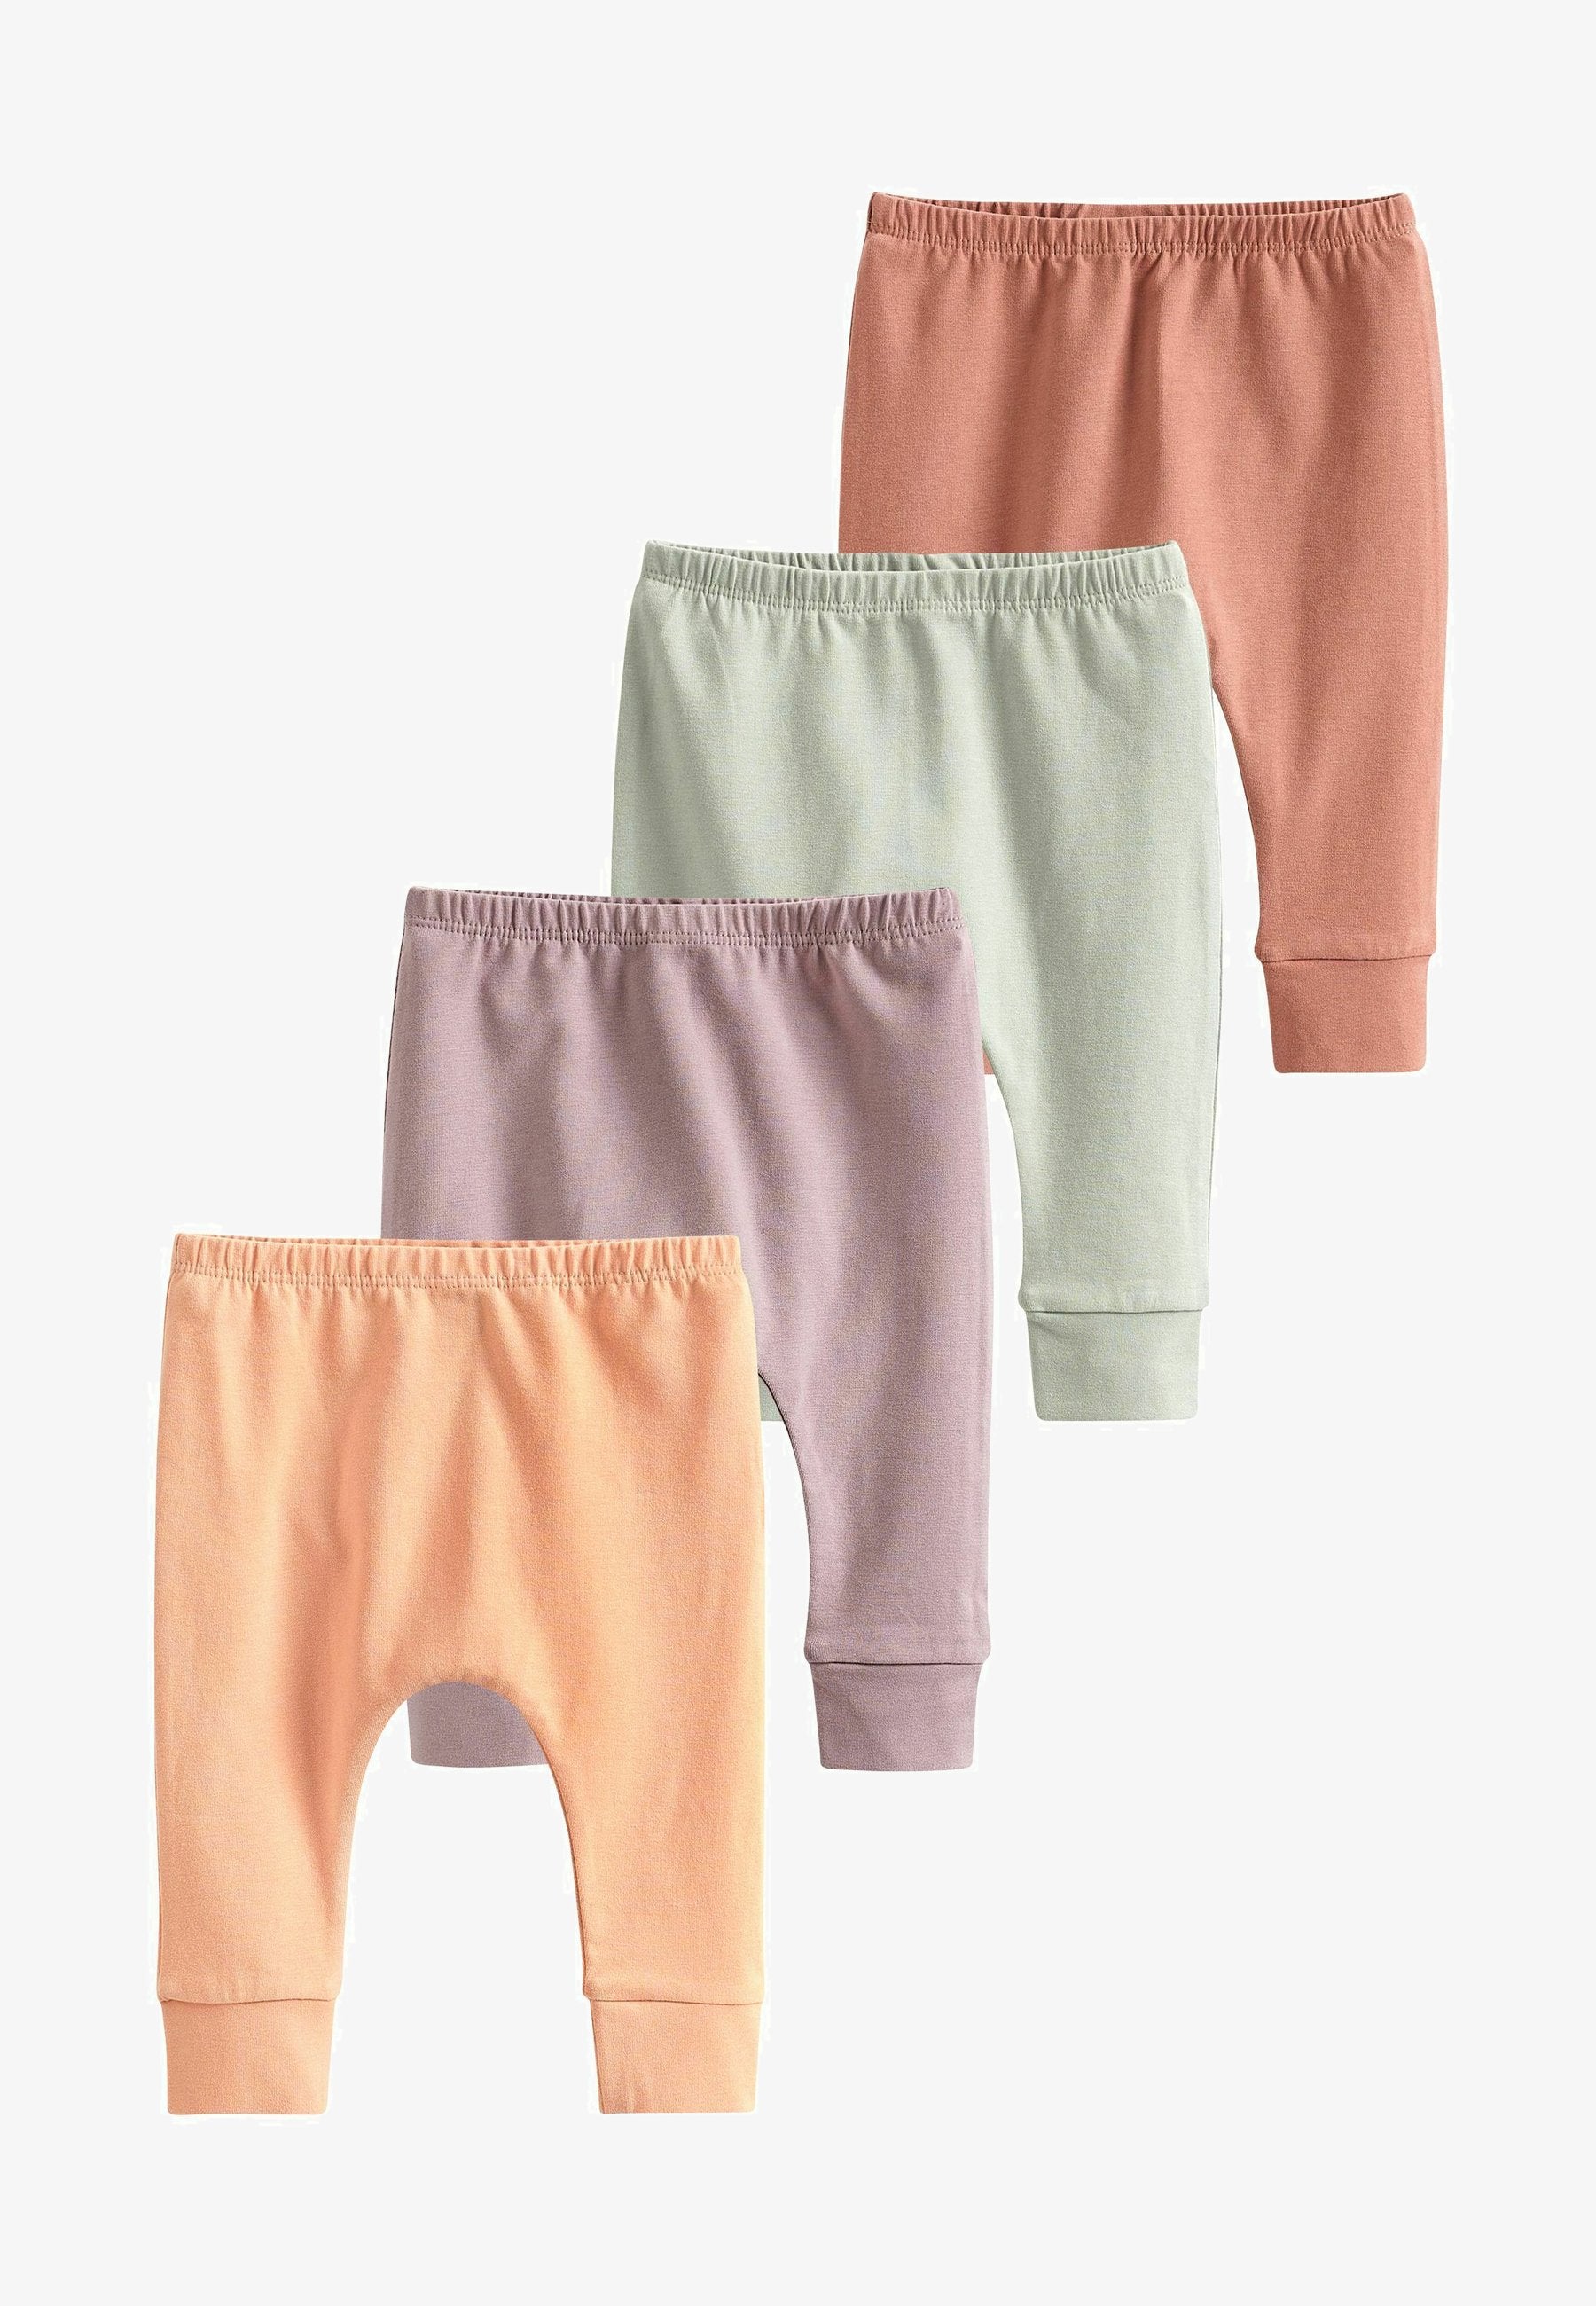 Next Baby Leggings 4 Pack – Your Daily Store Online